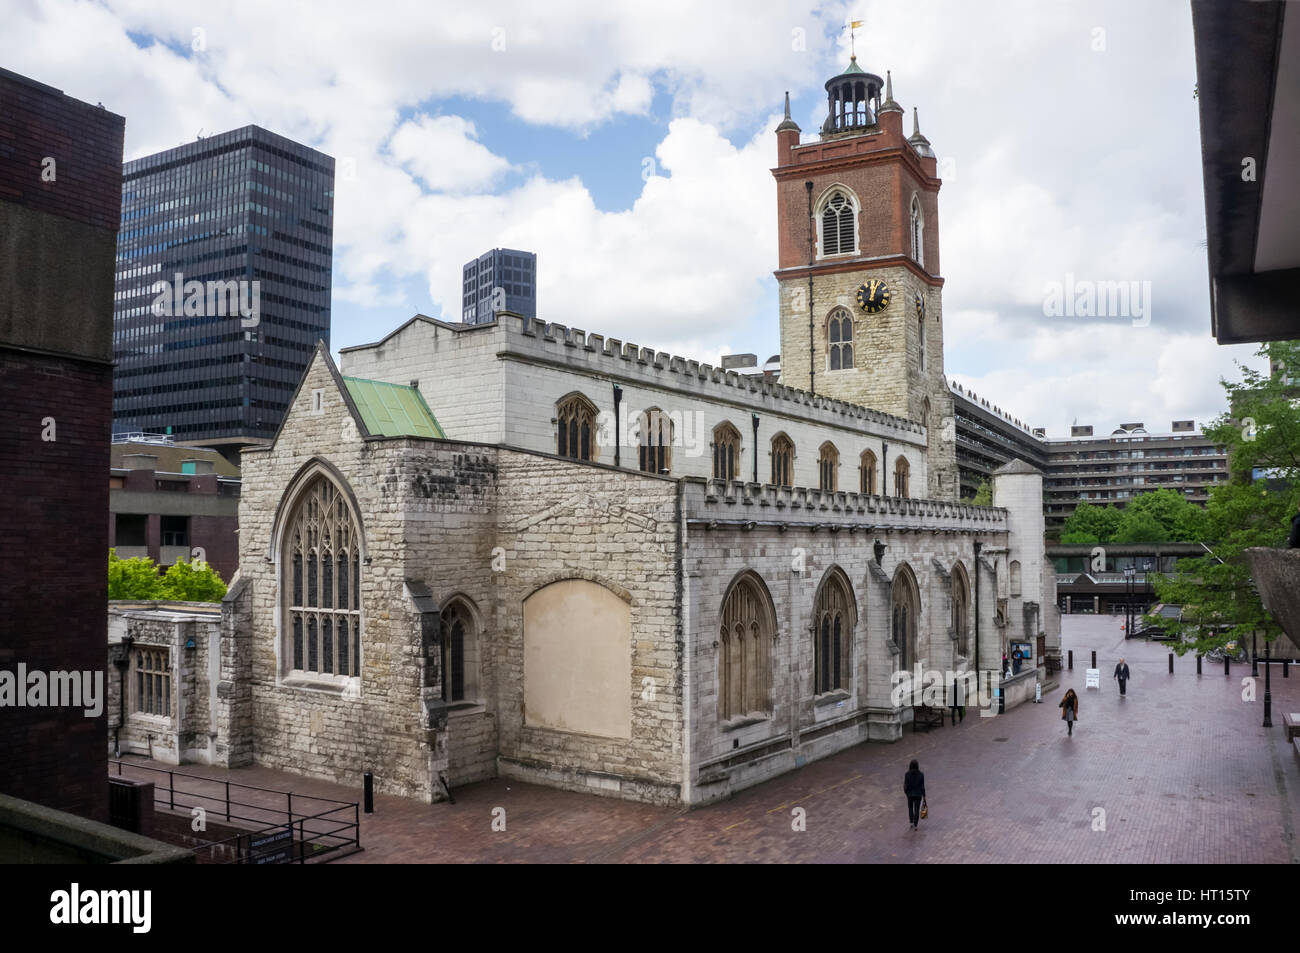 St Giles Cripplegate is a Perpendicular Gothic church in the City of London on the Barbican estate. It was built in Middle Ages and rebuilt after WWII Stock Photo